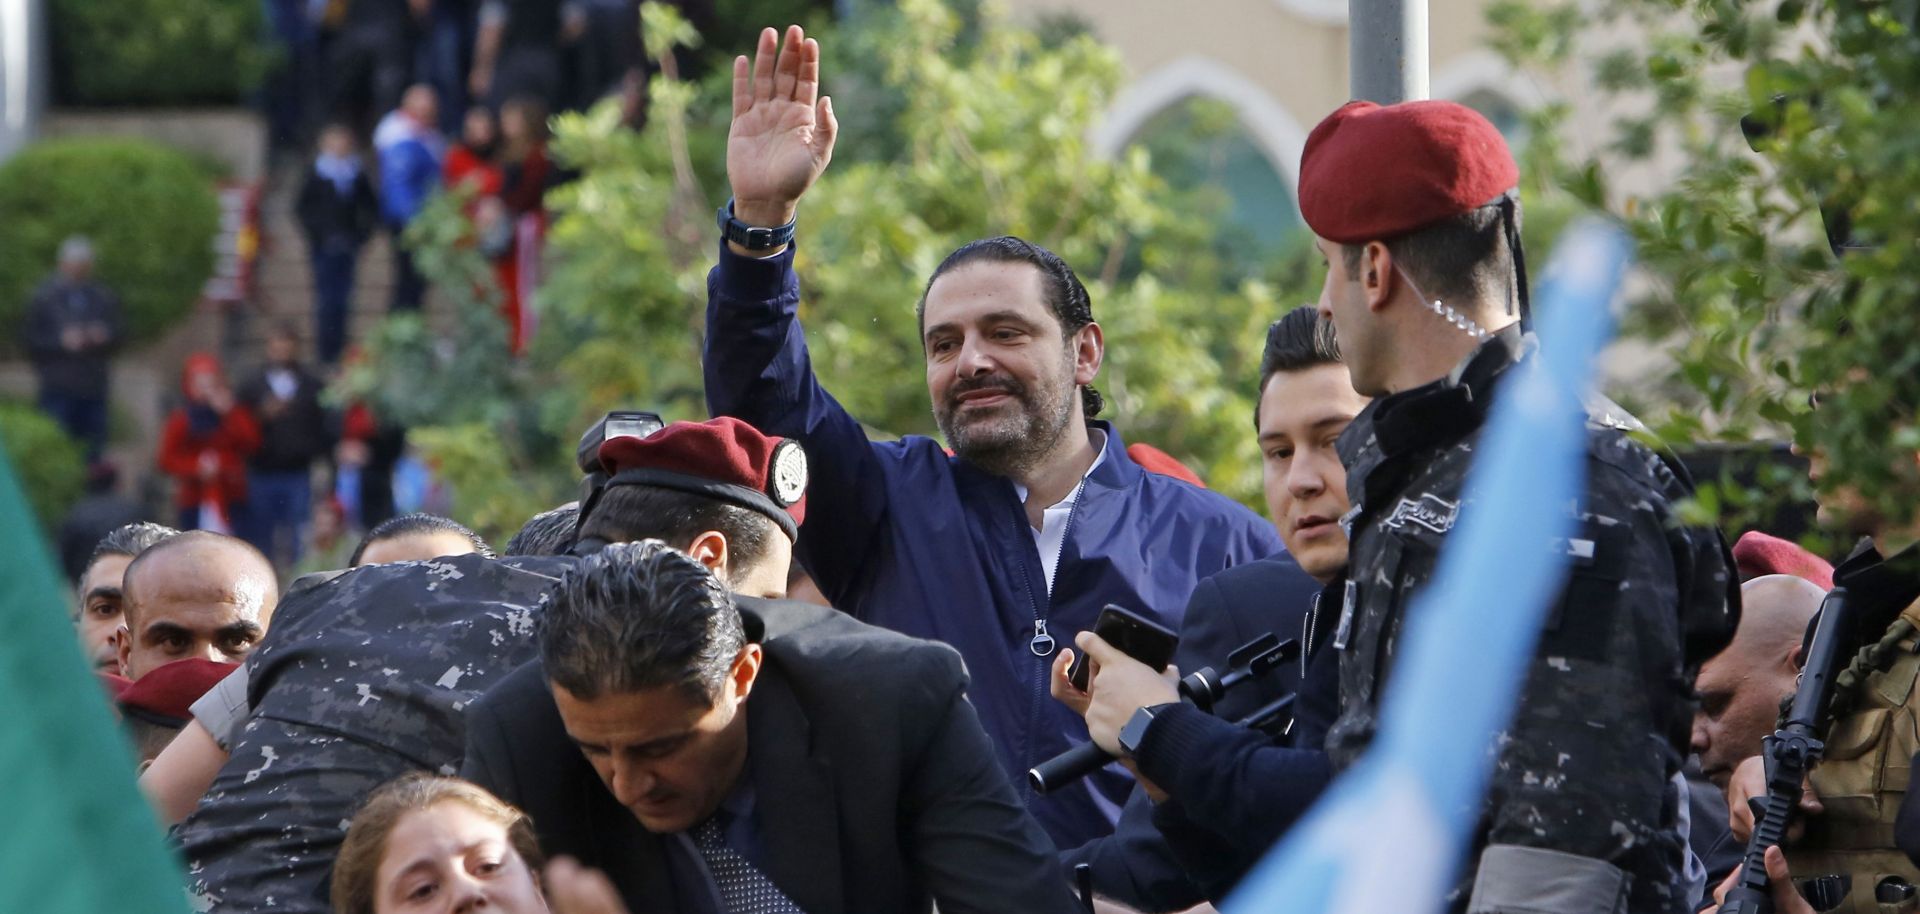 Lebanese Prime Minister Saad al-Hariri arrives in Beirut on Nov. 22, after a strange weekslong odyssey during which he resigned his post from Saudi Arabia.